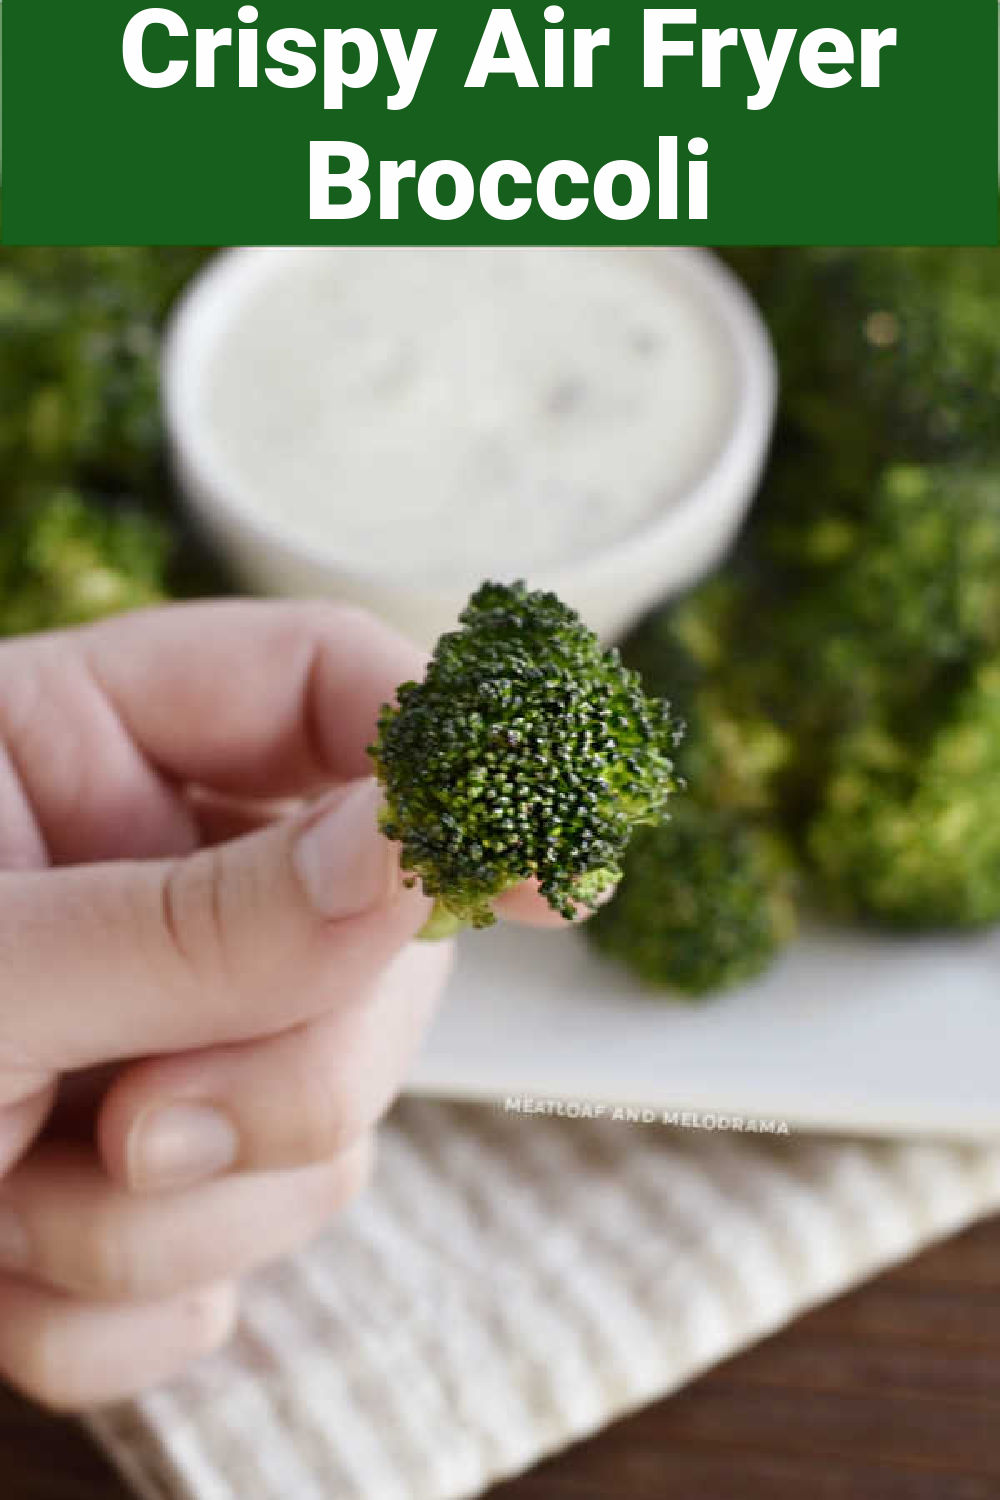 This Crispy Air Fryer Broccoli Recipe with garlic and Parmesan cheese is a healthy side dish that is low carb and delicious!  Toss it with olive oil and a few spices, and it's ready to eat in just 6 minutes! via @meamel